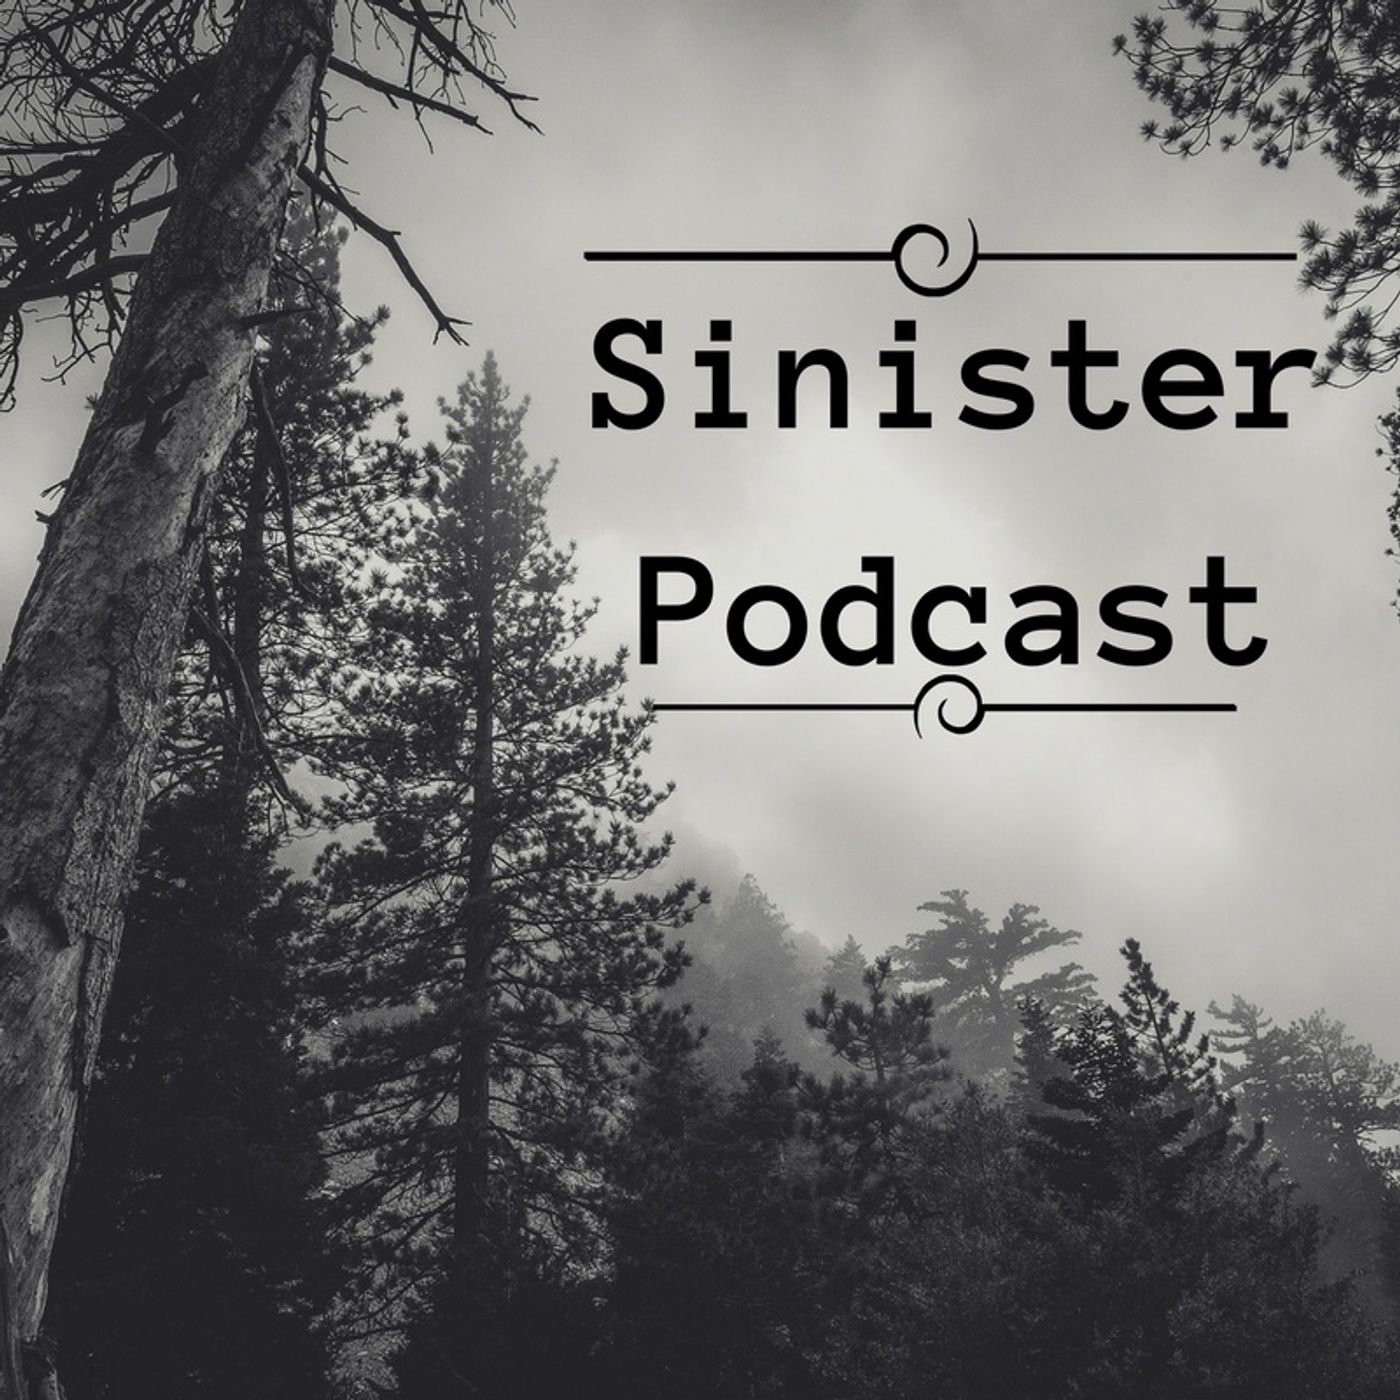 The Sinister Podcast | Creepy Stories